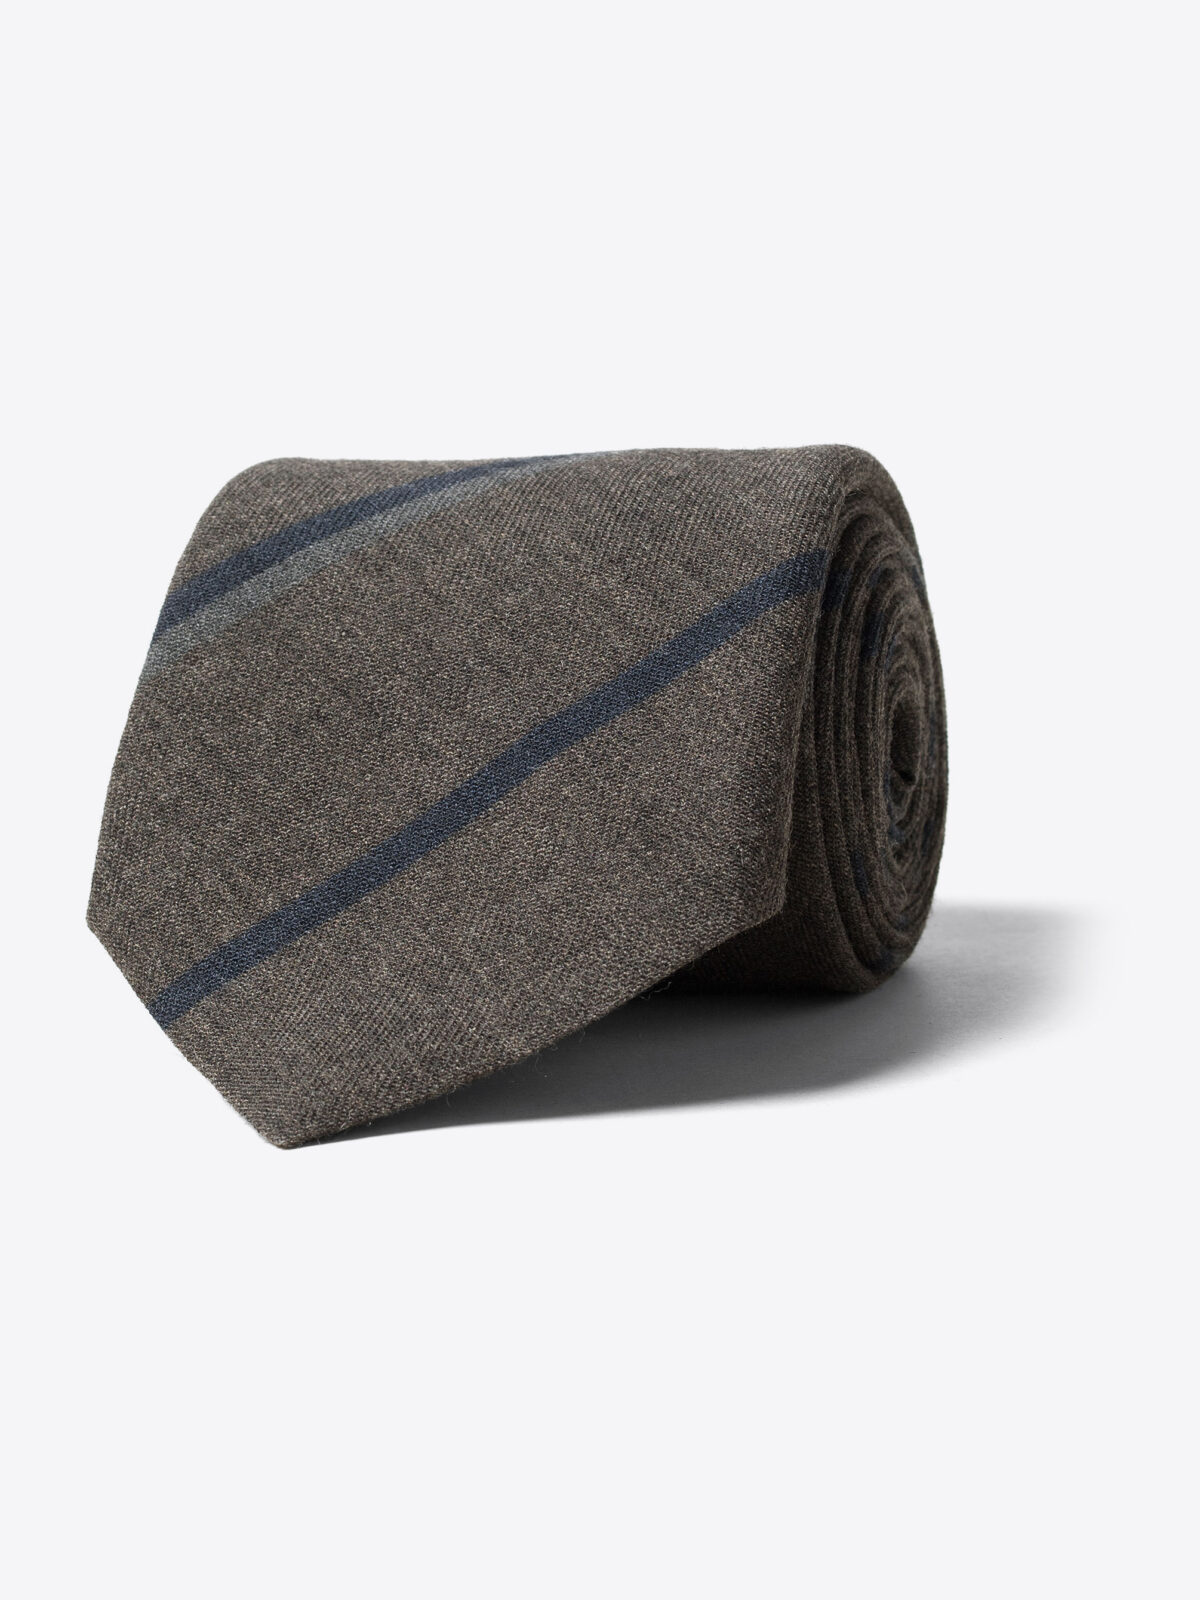 Taupe and Navy Striped Wool Tie